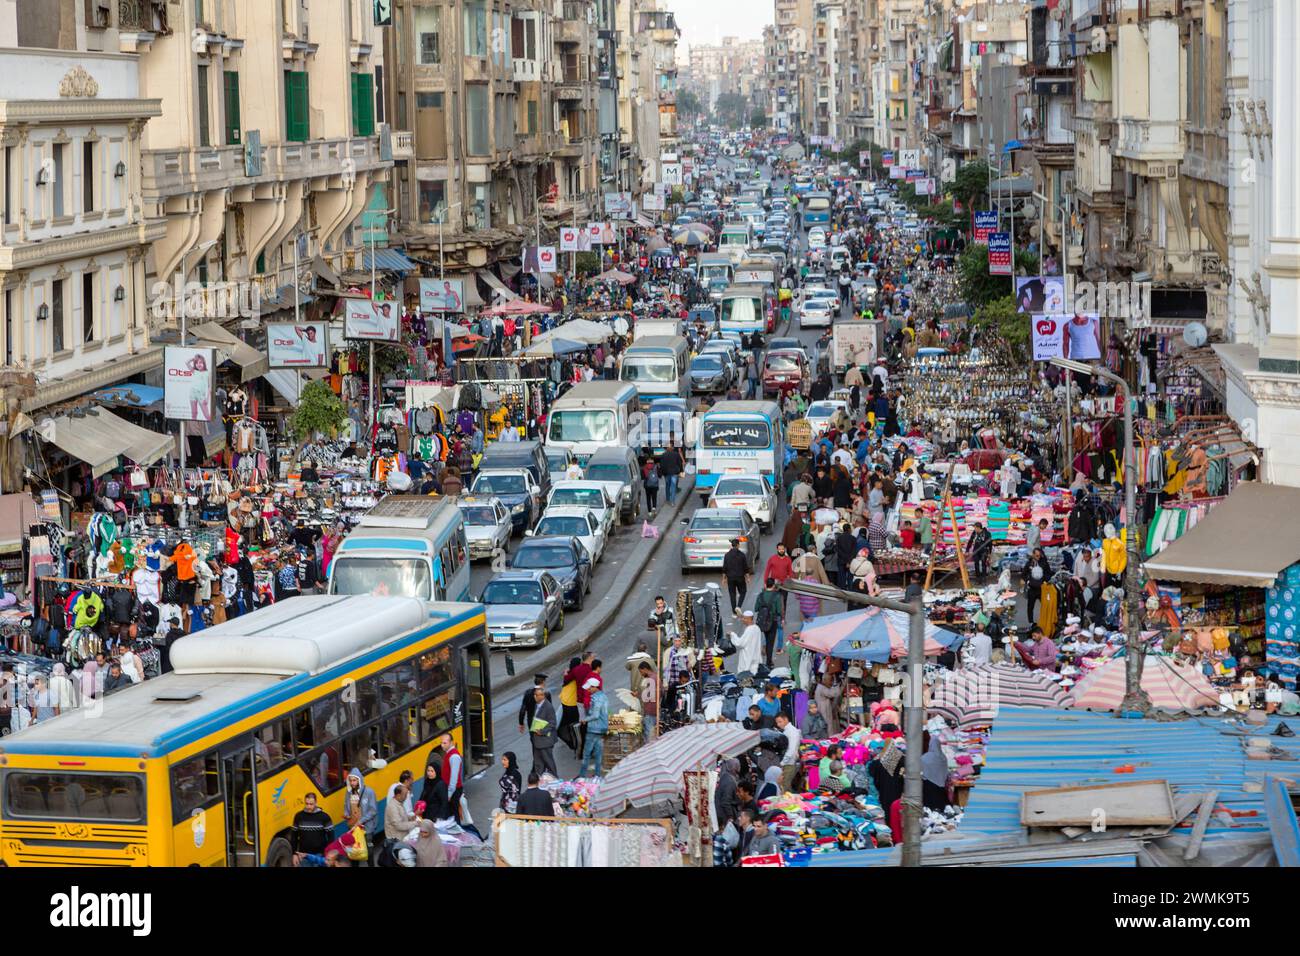 Normal Cairo street activity with congested traffic, people doing commerce and shop venders, Cairo Egypt Stock Photo